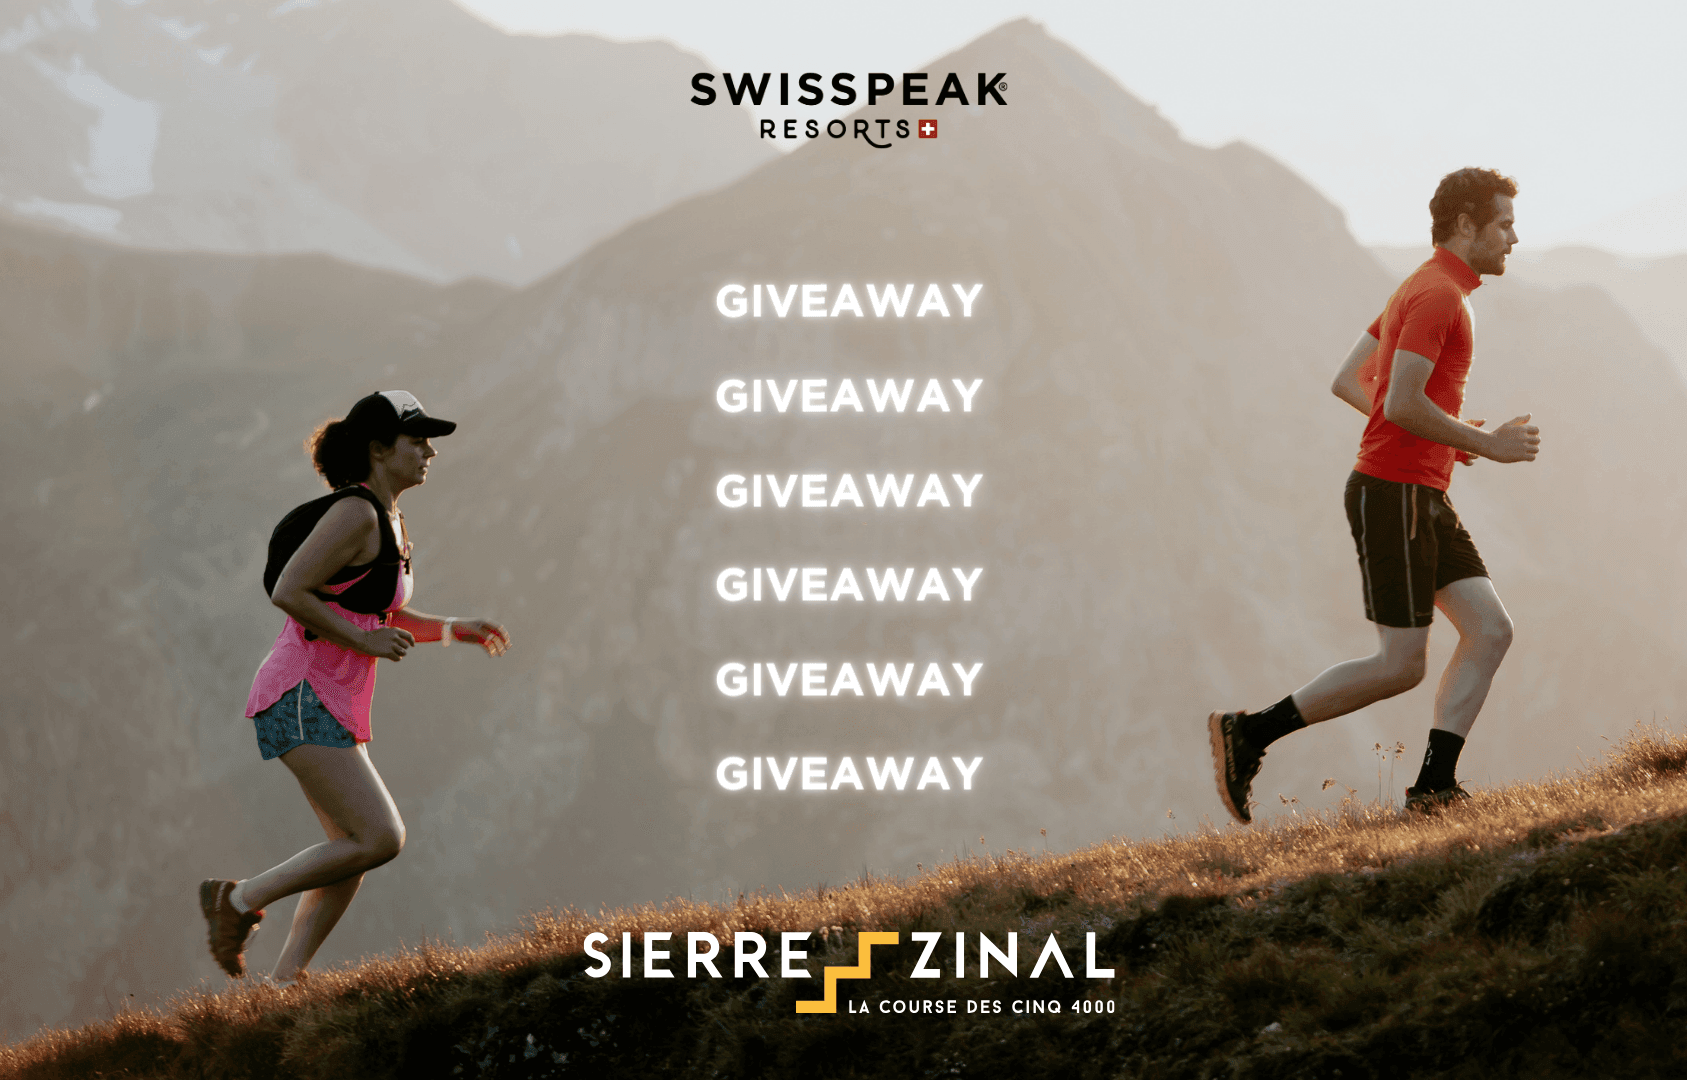 Giveaway closed - Win 1 bib for the Sierre - Zinal race!